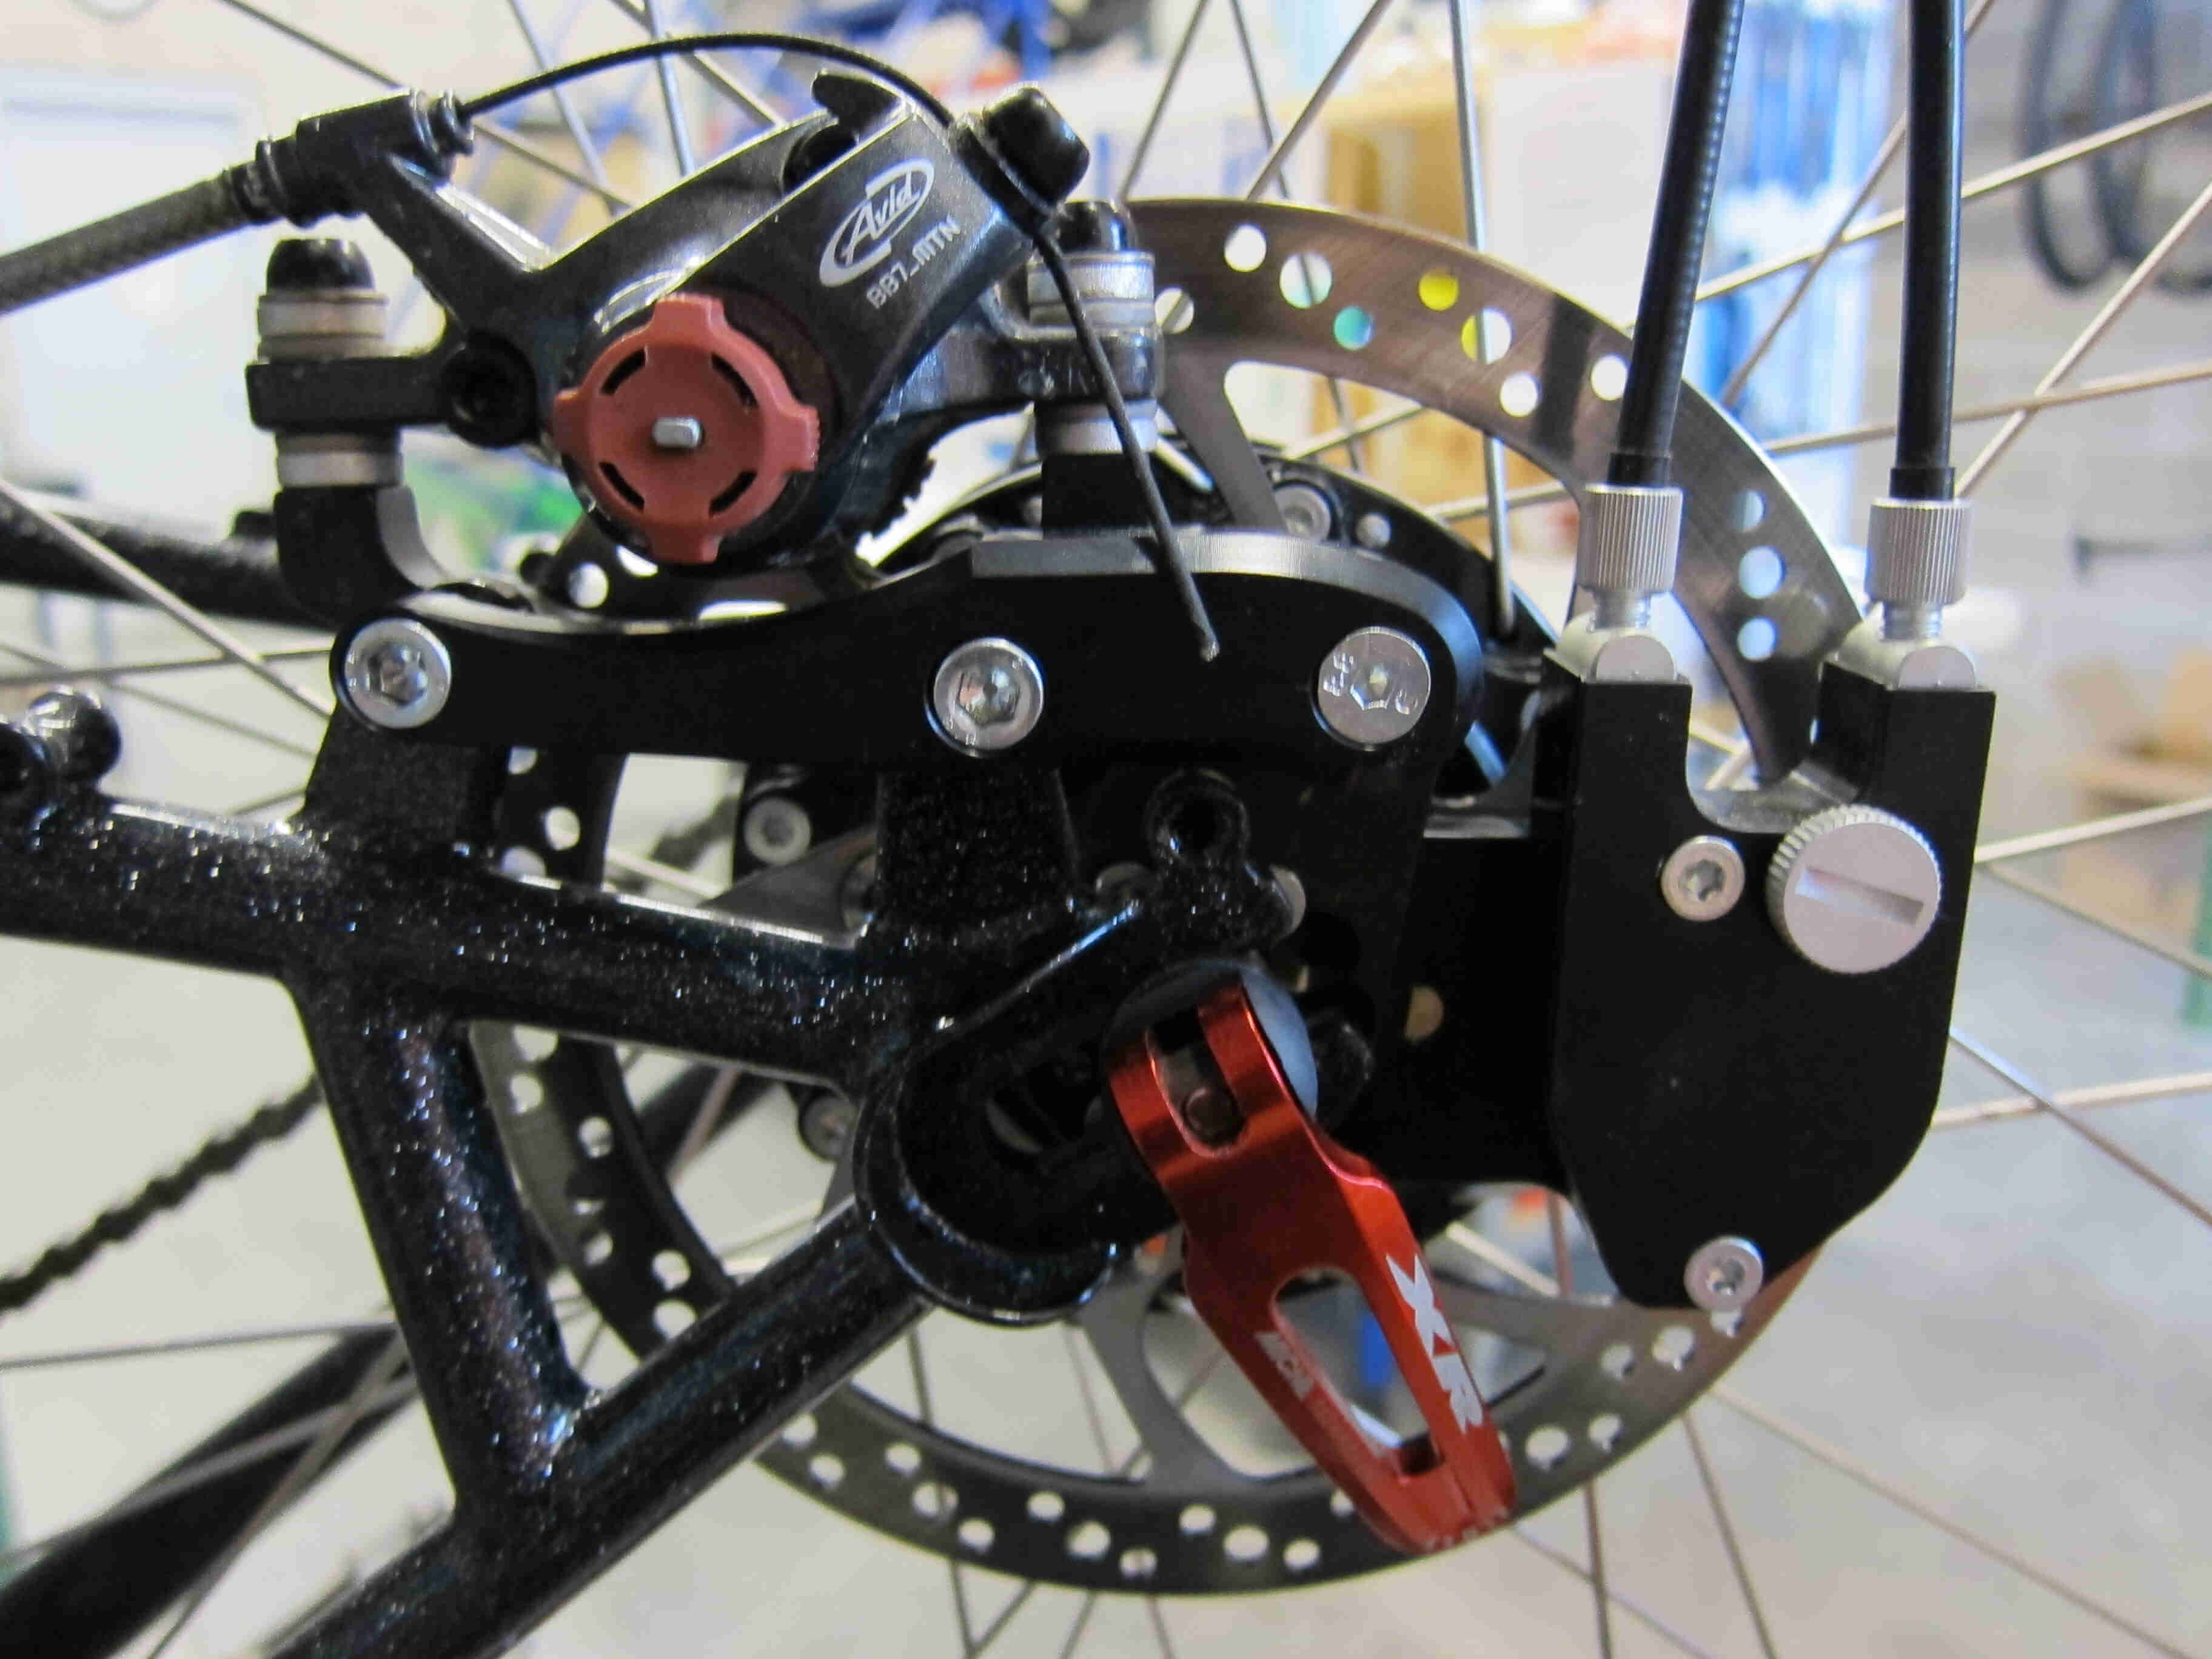 Left side, close up view of a Rohloff hub mounted onto a Surly Moonlander fat bike frame